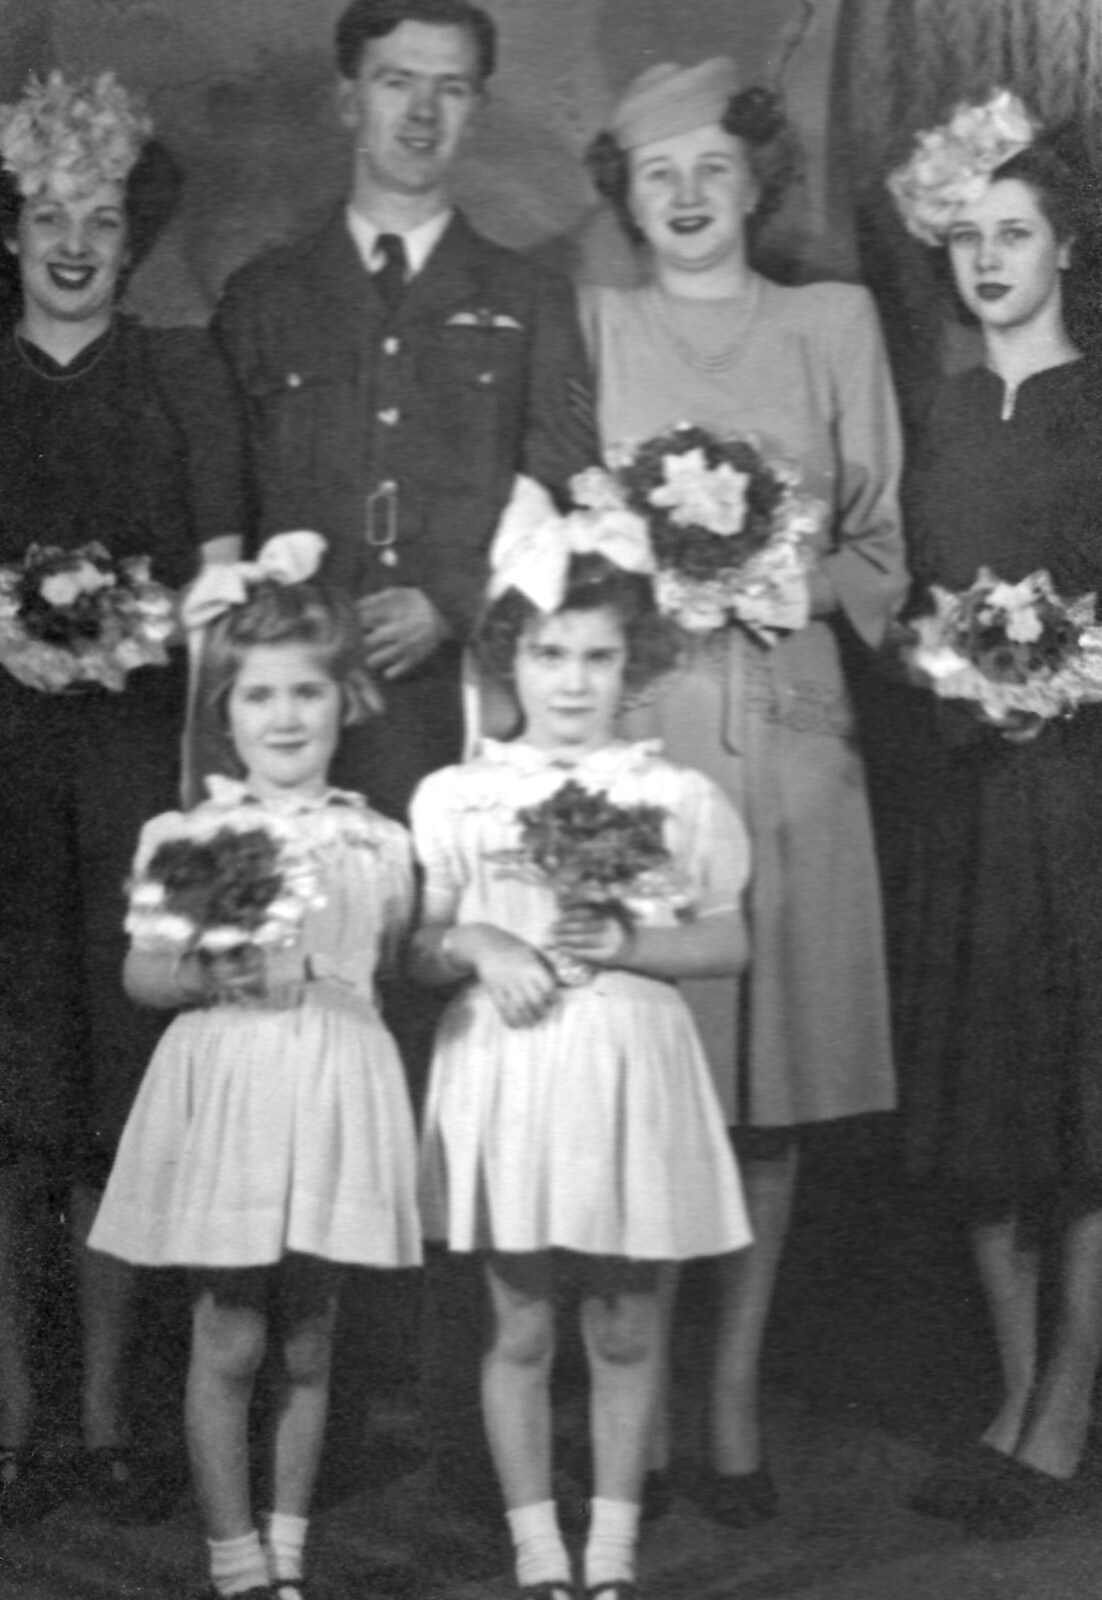 The wedding from Family History: The 1940s and 1950s - 24th January 2020